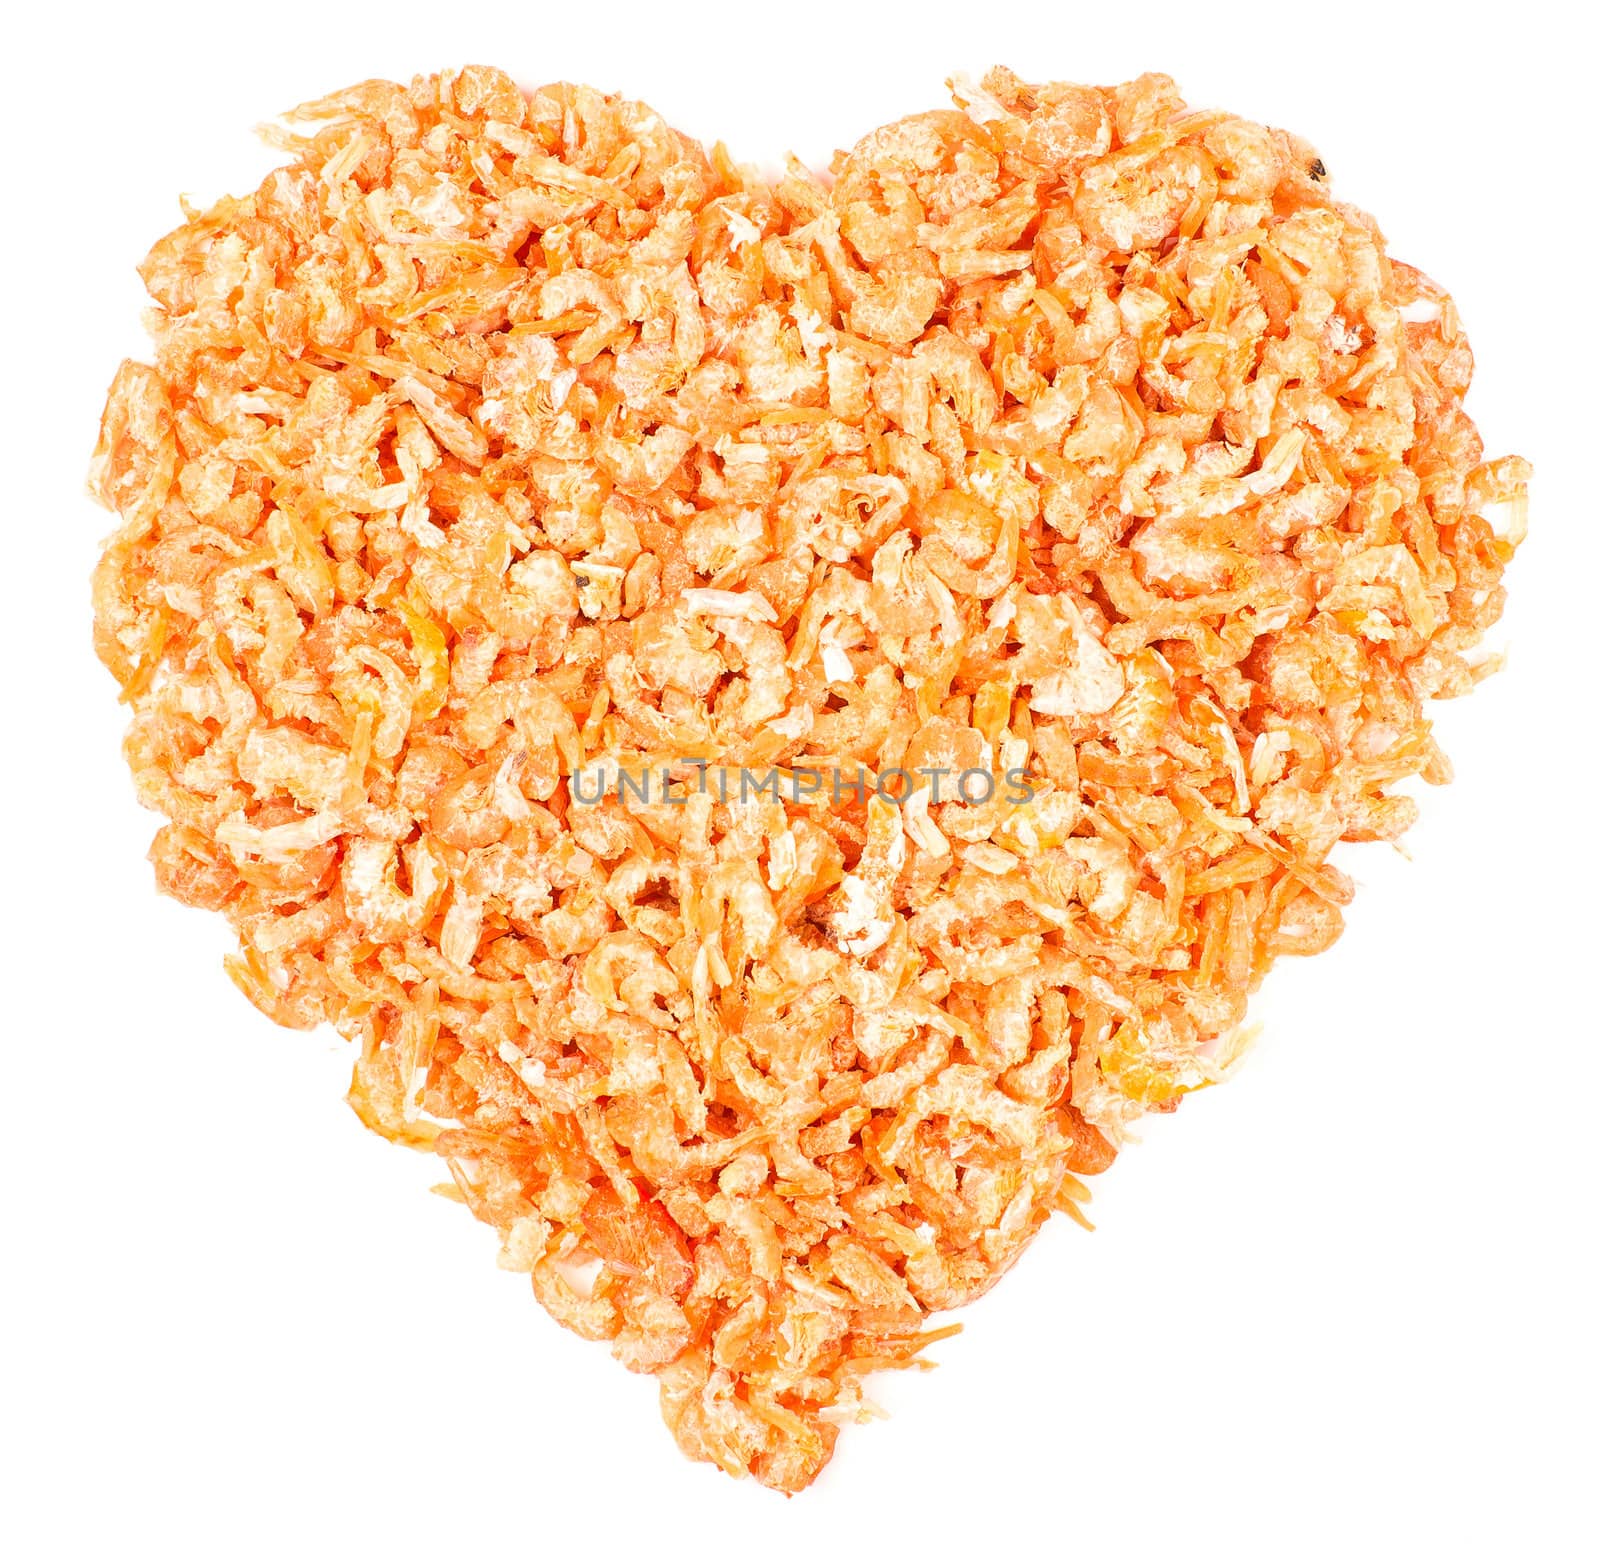 Heart made of dried shrimps, isolated on a white background